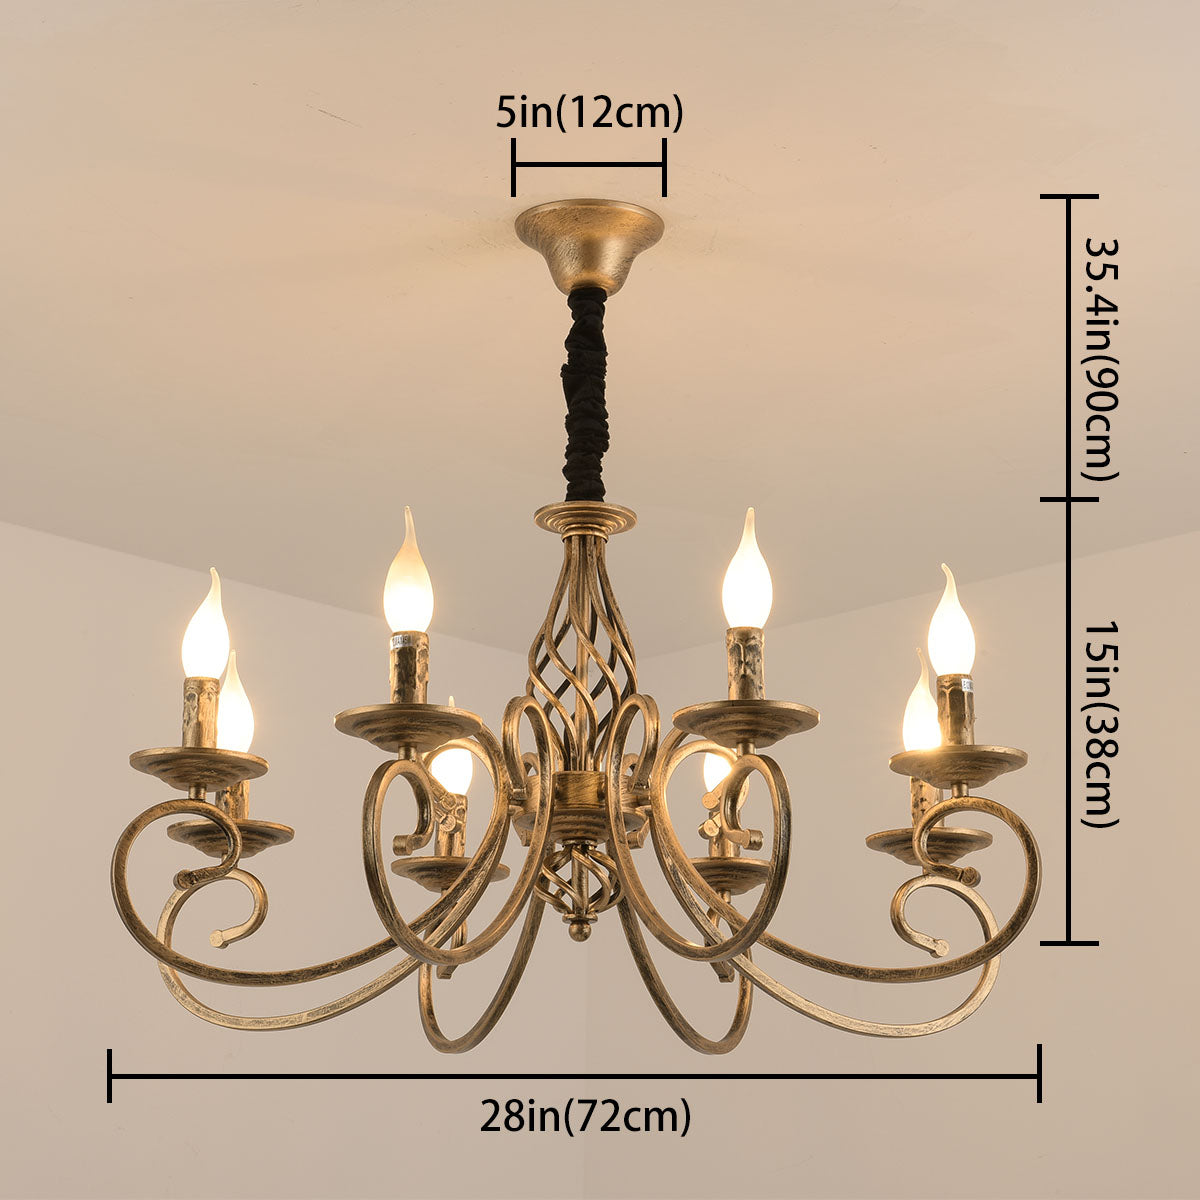 Detailed clofrench country wrought iron chandelier with bronze finish shown with dimensions